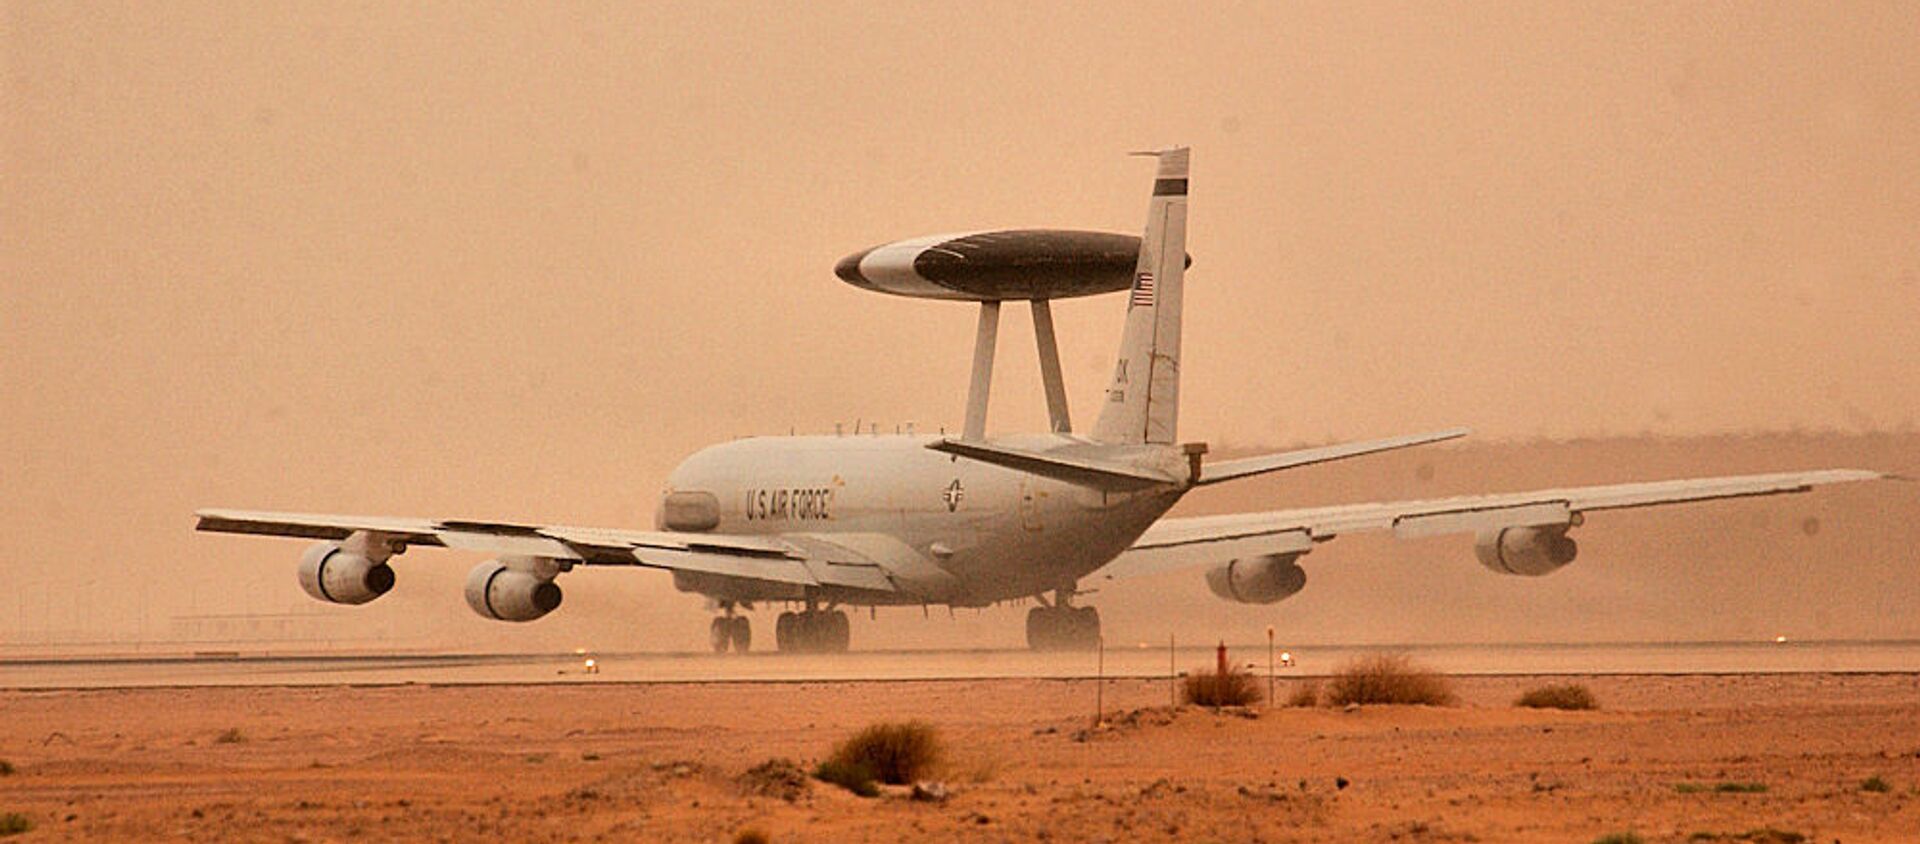 An E-3 AWACS aircraft deployed to the 363rd Air Expeditionary Wing takes off for a mission from Prince Sultan Air Base in Saudi Arabia during a sand storm March 25, 2003. - Sputnik International, 1920, 26.01.2021